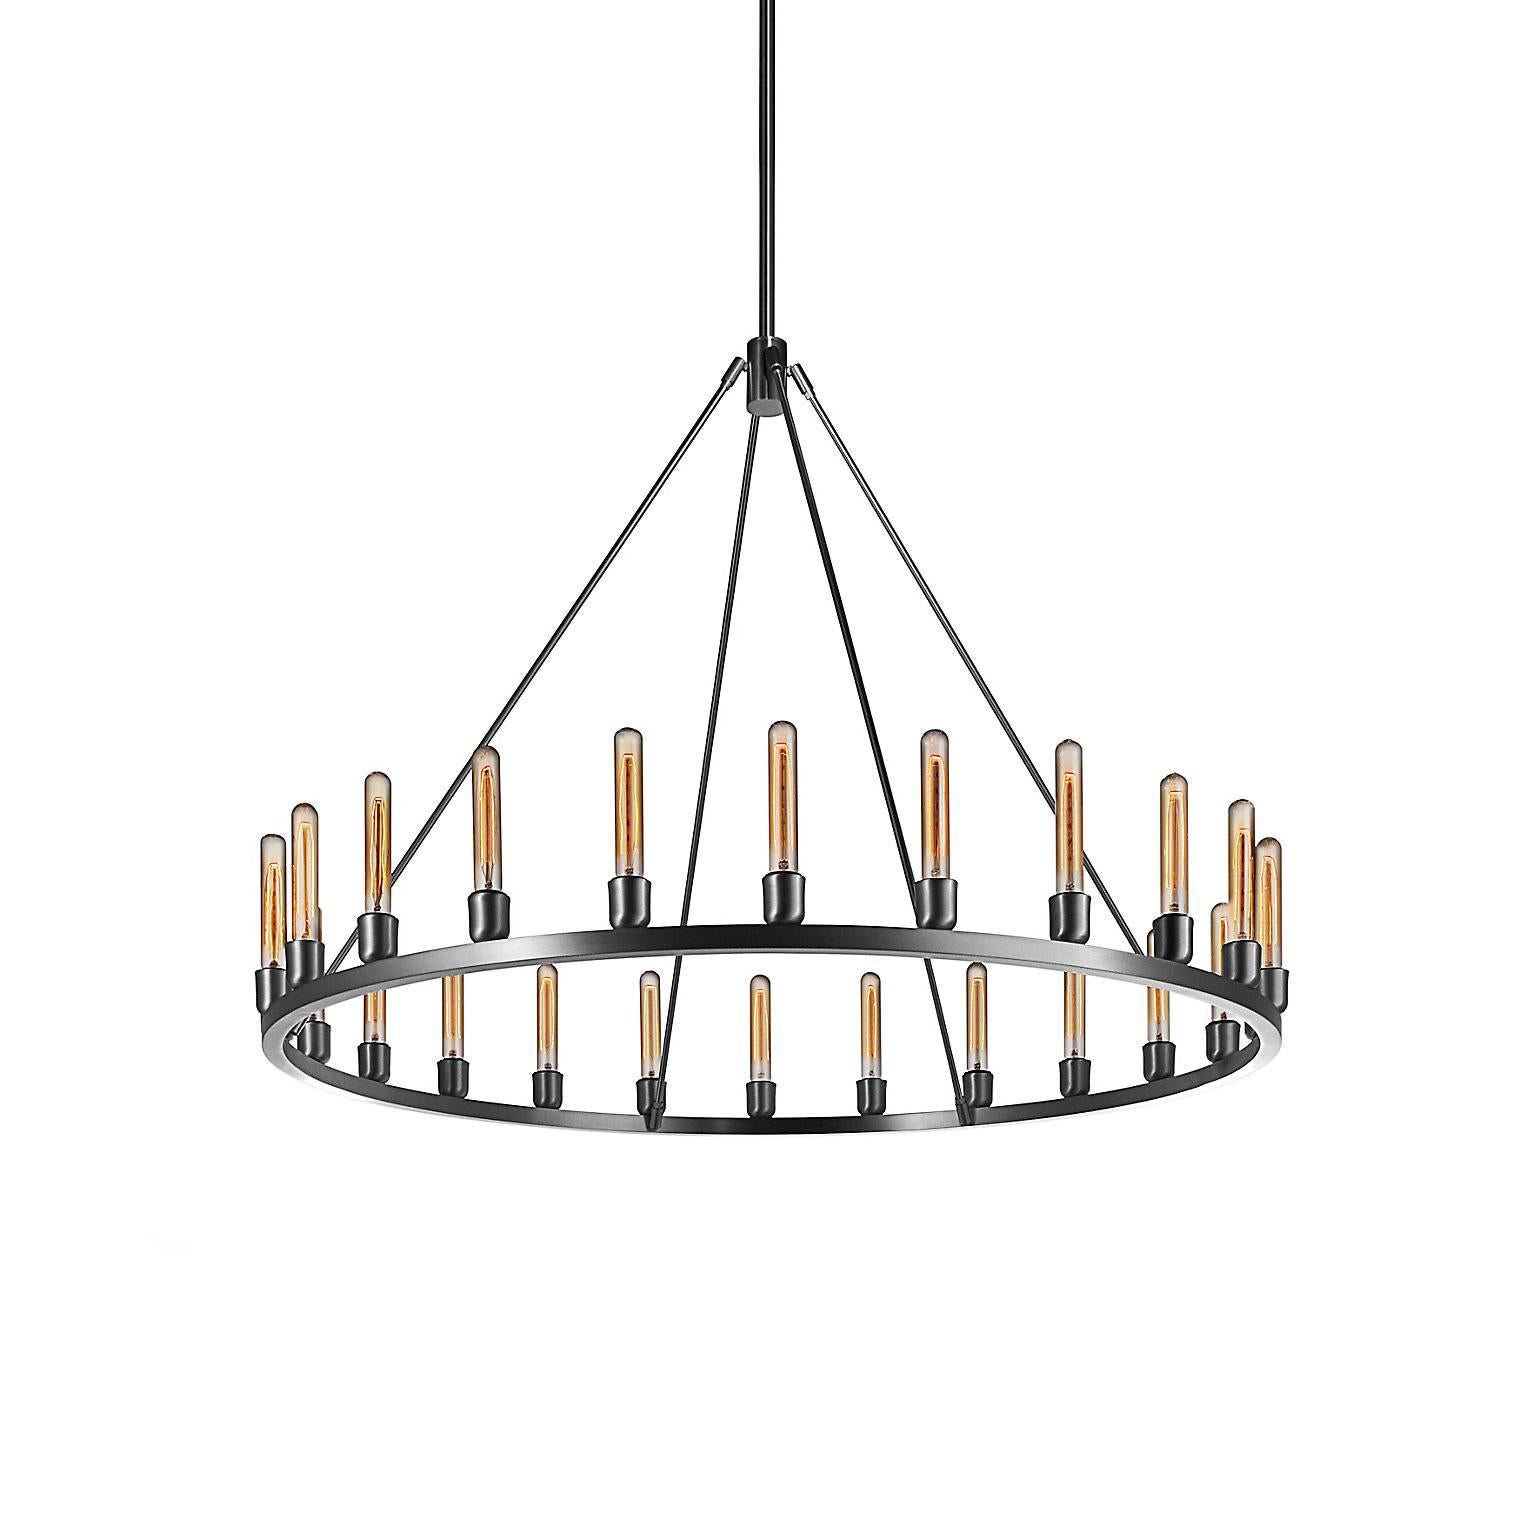 The spark chandelier celebrates minimal design, emphasizing the elegance of exposed bulbs. This chic-meets-industrial fixture creates welcome intrigue in any setting with its assortment of vintage-style lamping options, which can be oriented in